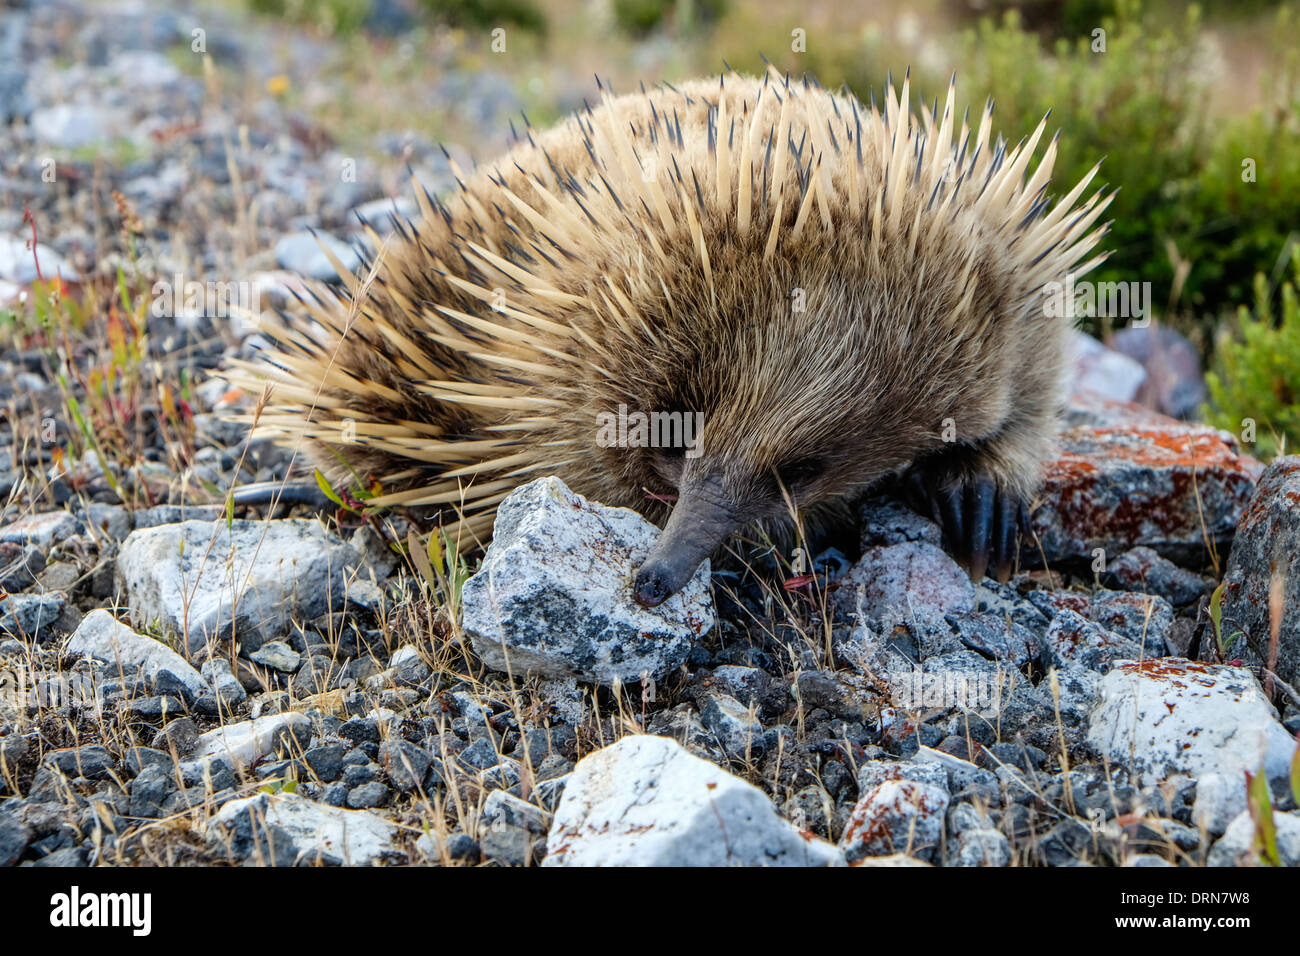 An Australian echidna, the spiny anteater foraging for insects Stock Photo